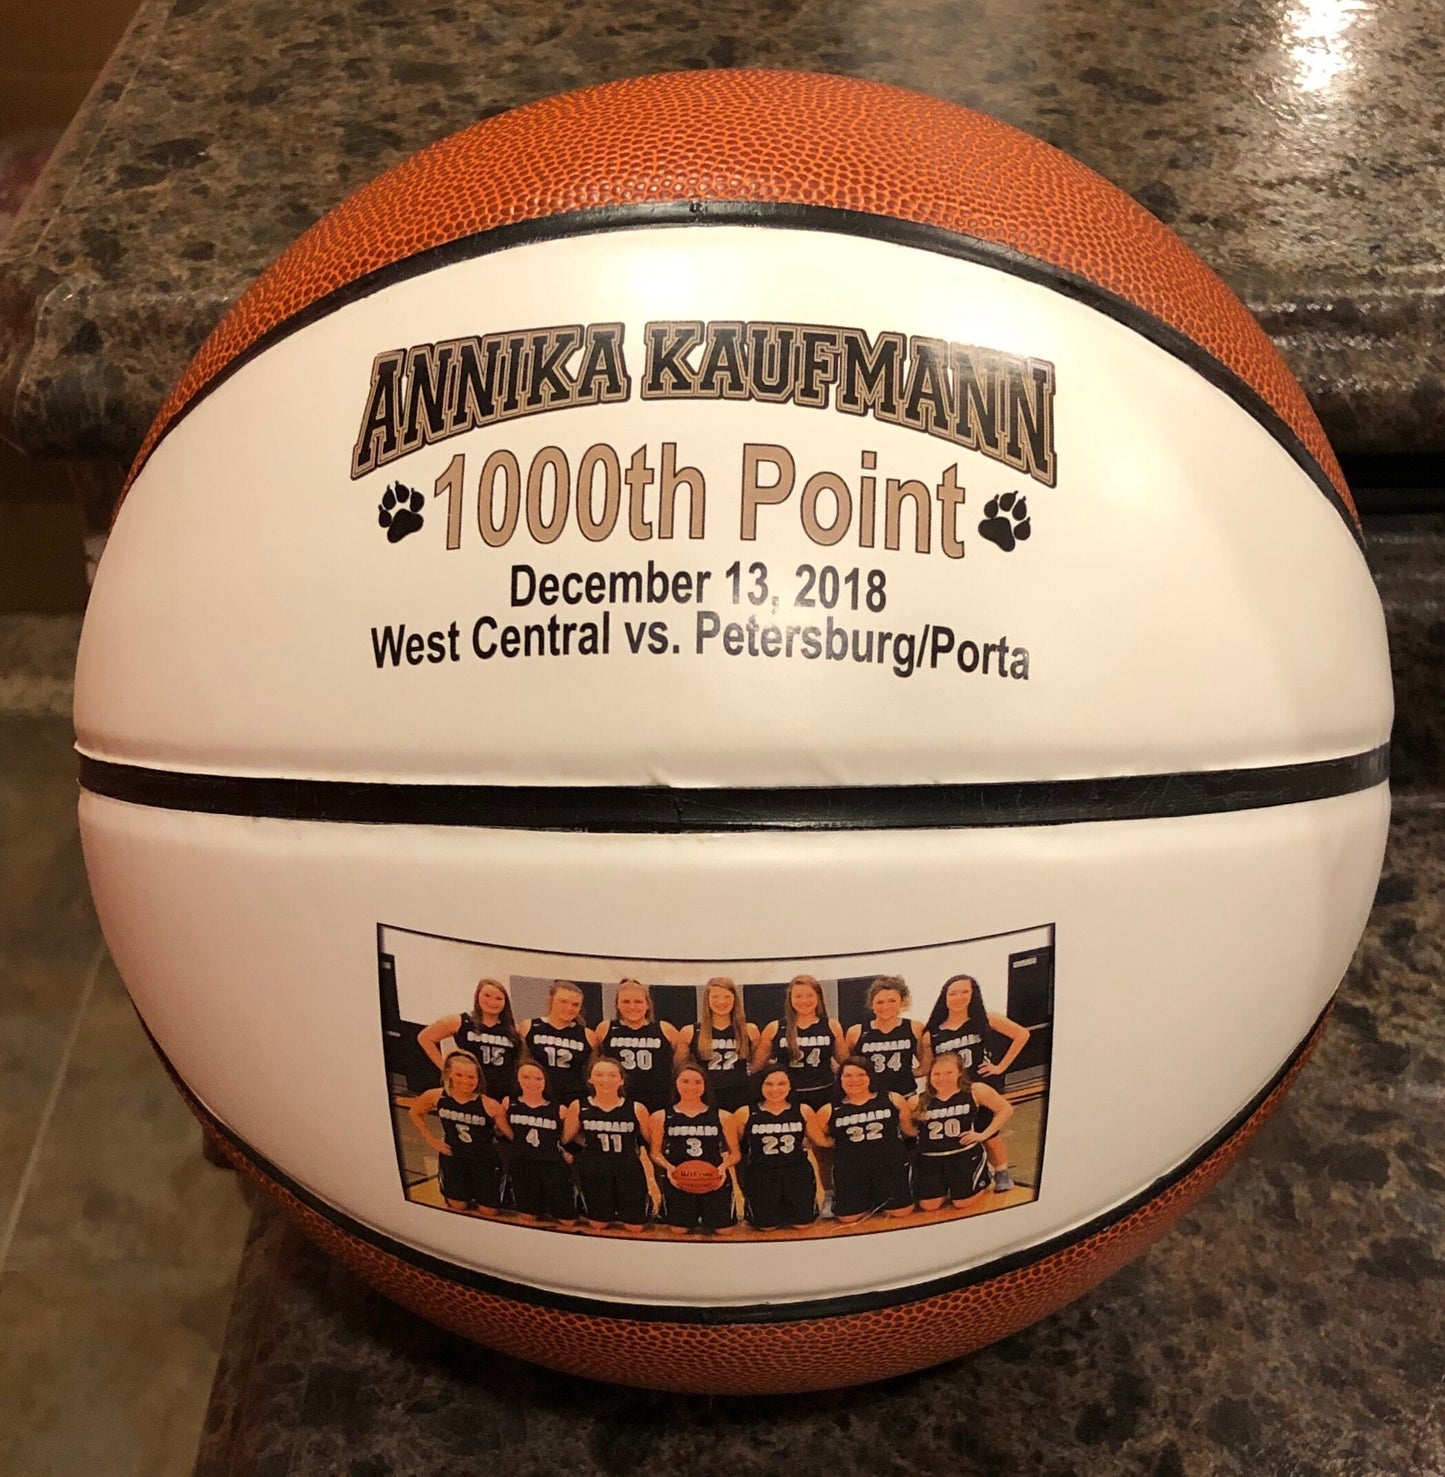 Personalized Regulation Size Double Panel Basketballs for Coaches Gifts, Senior Gifts, Team Awards, Weddings and Basketball Gifts